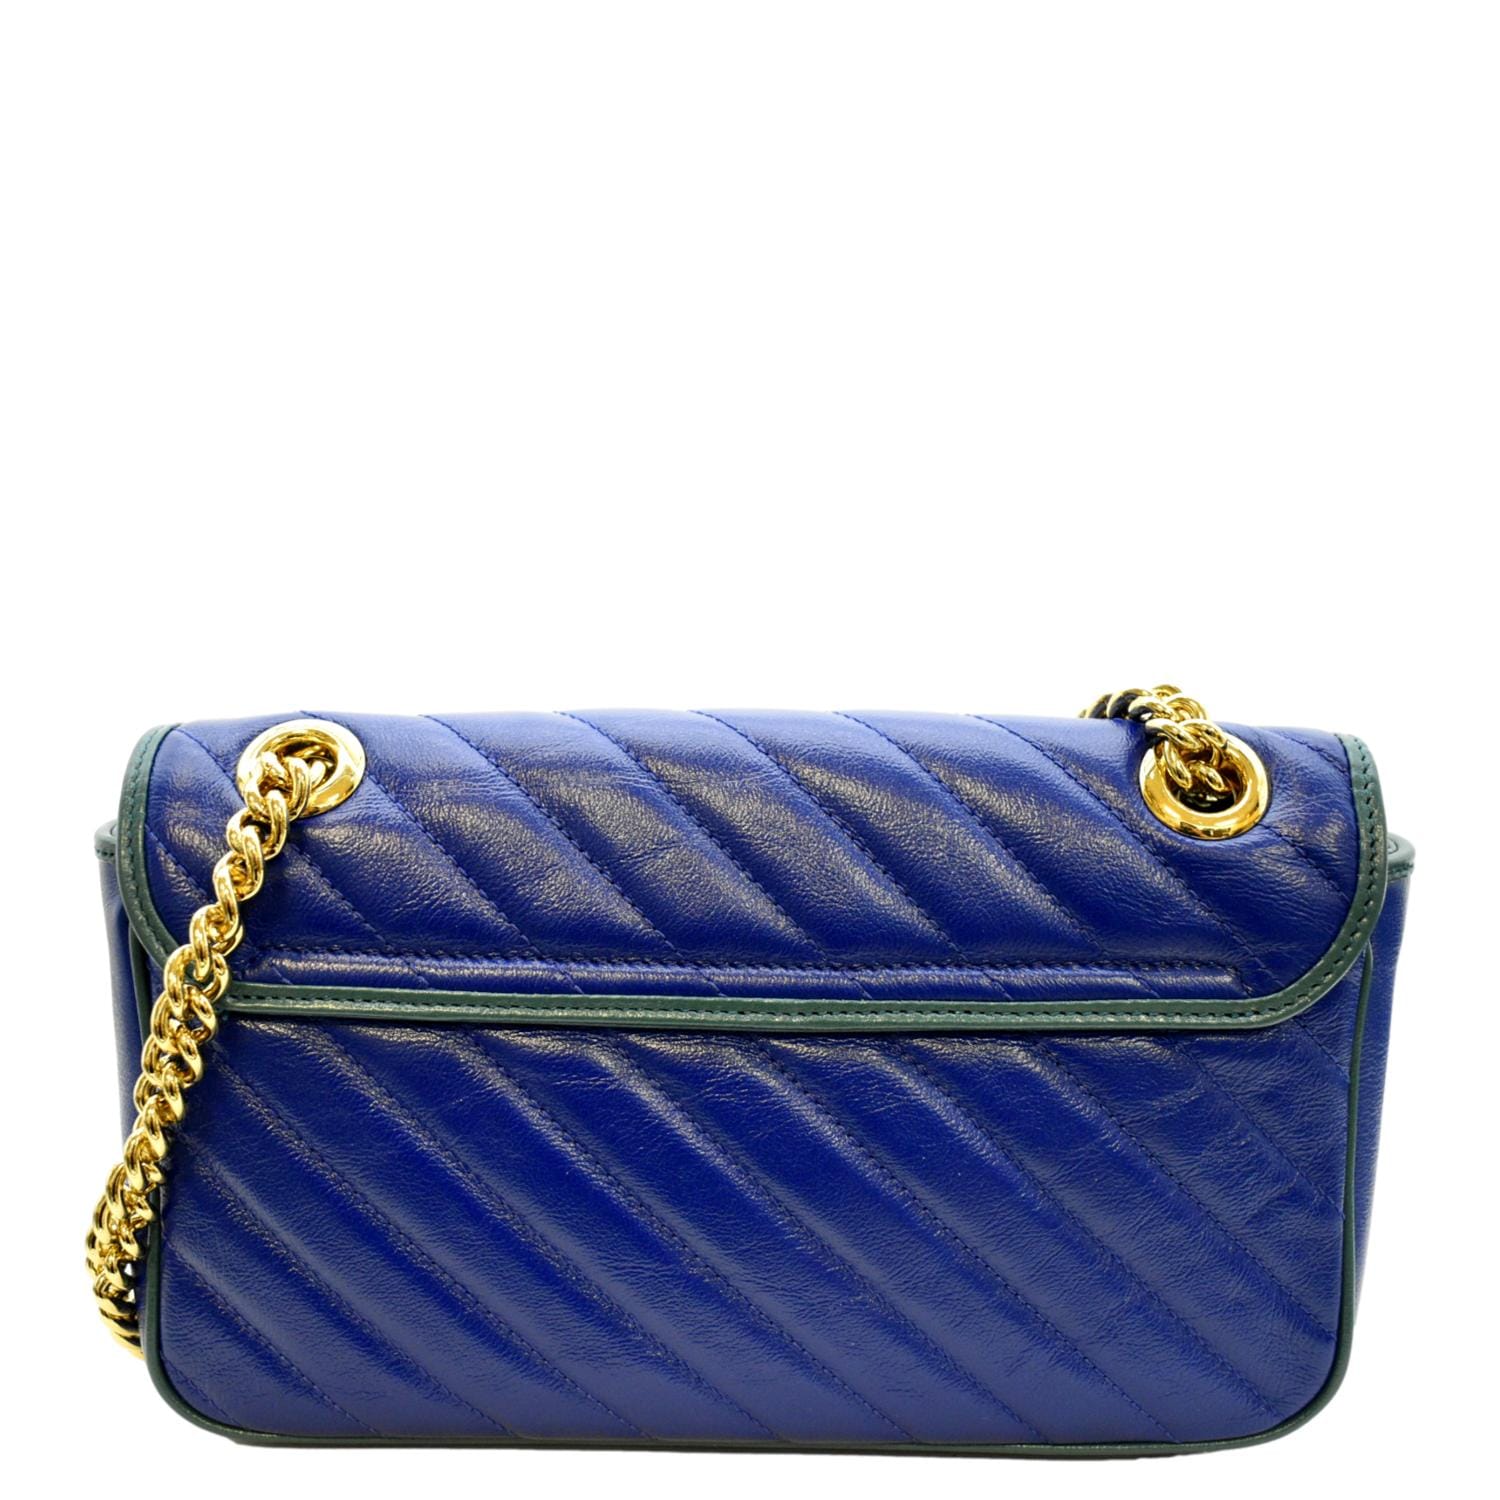 Chanel CHANEL - QUILTED SAKS BLUE JUMBO FLAP BAG